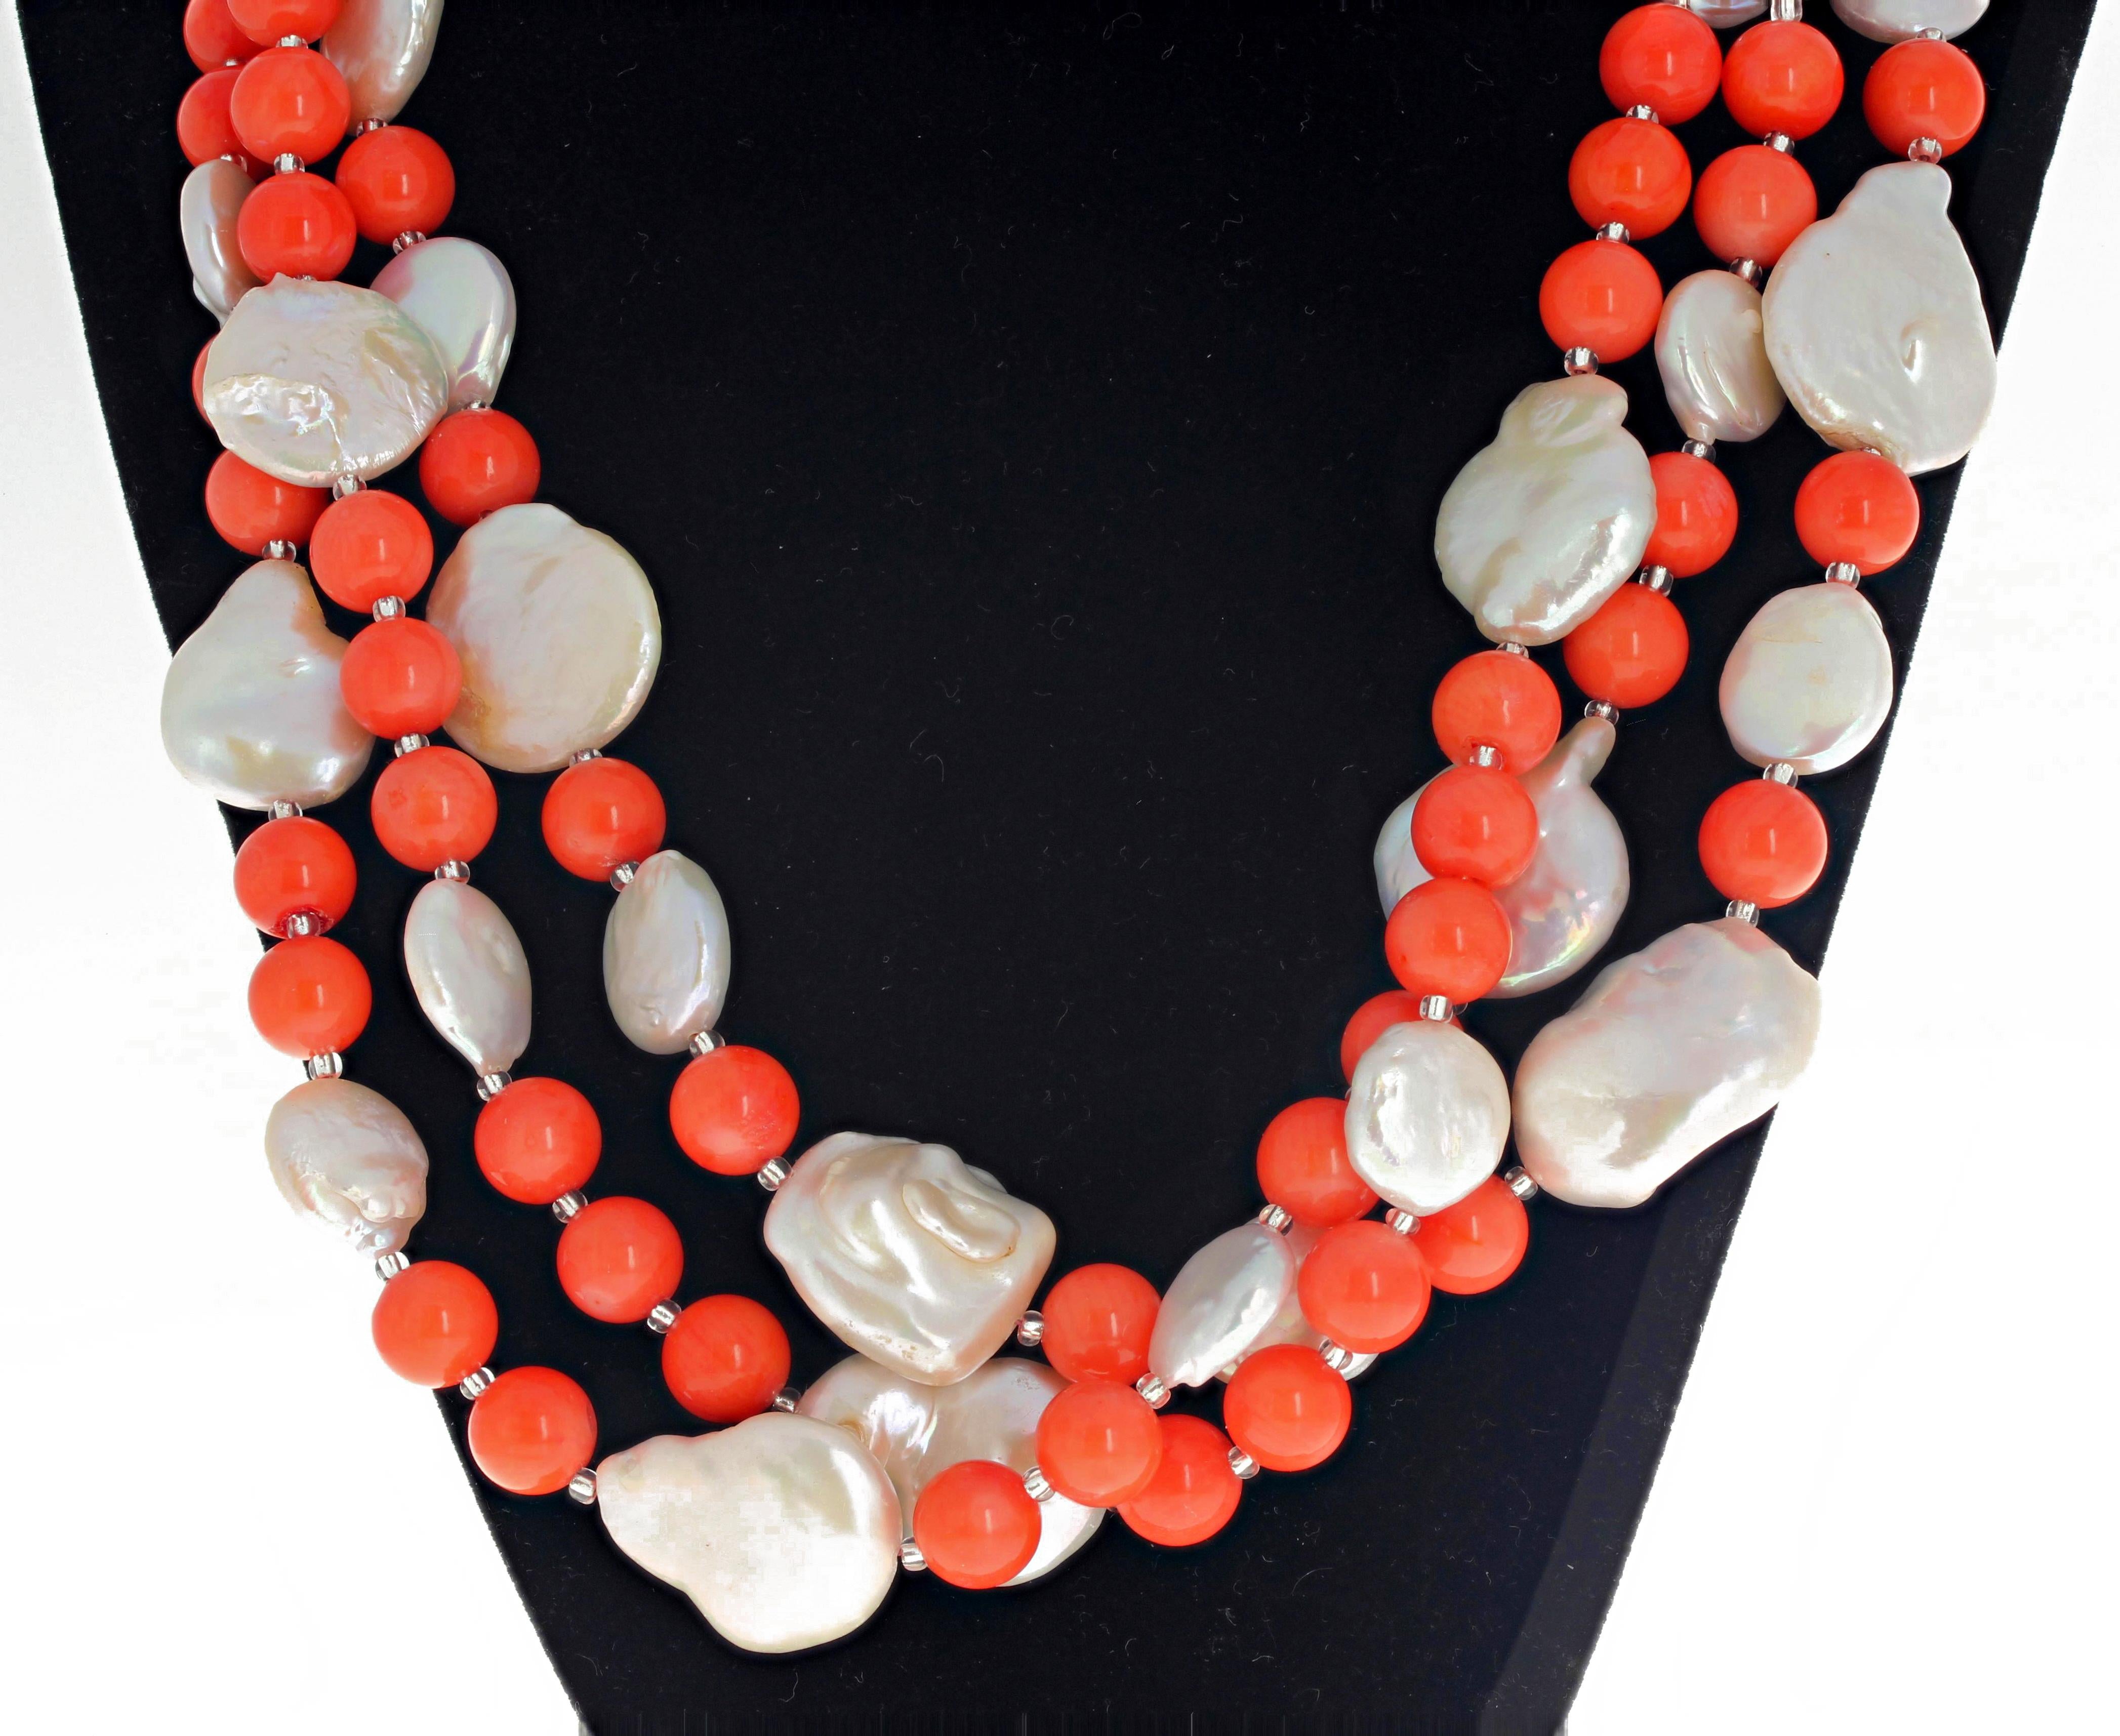 This Gemjunky large three-strand handmade necklace is elegantly designed with round polished real orange coral enhanced with roundish white coin pearls and little Czech sparkles set with an easy to use hook type clasp and is 20 inches long.  The